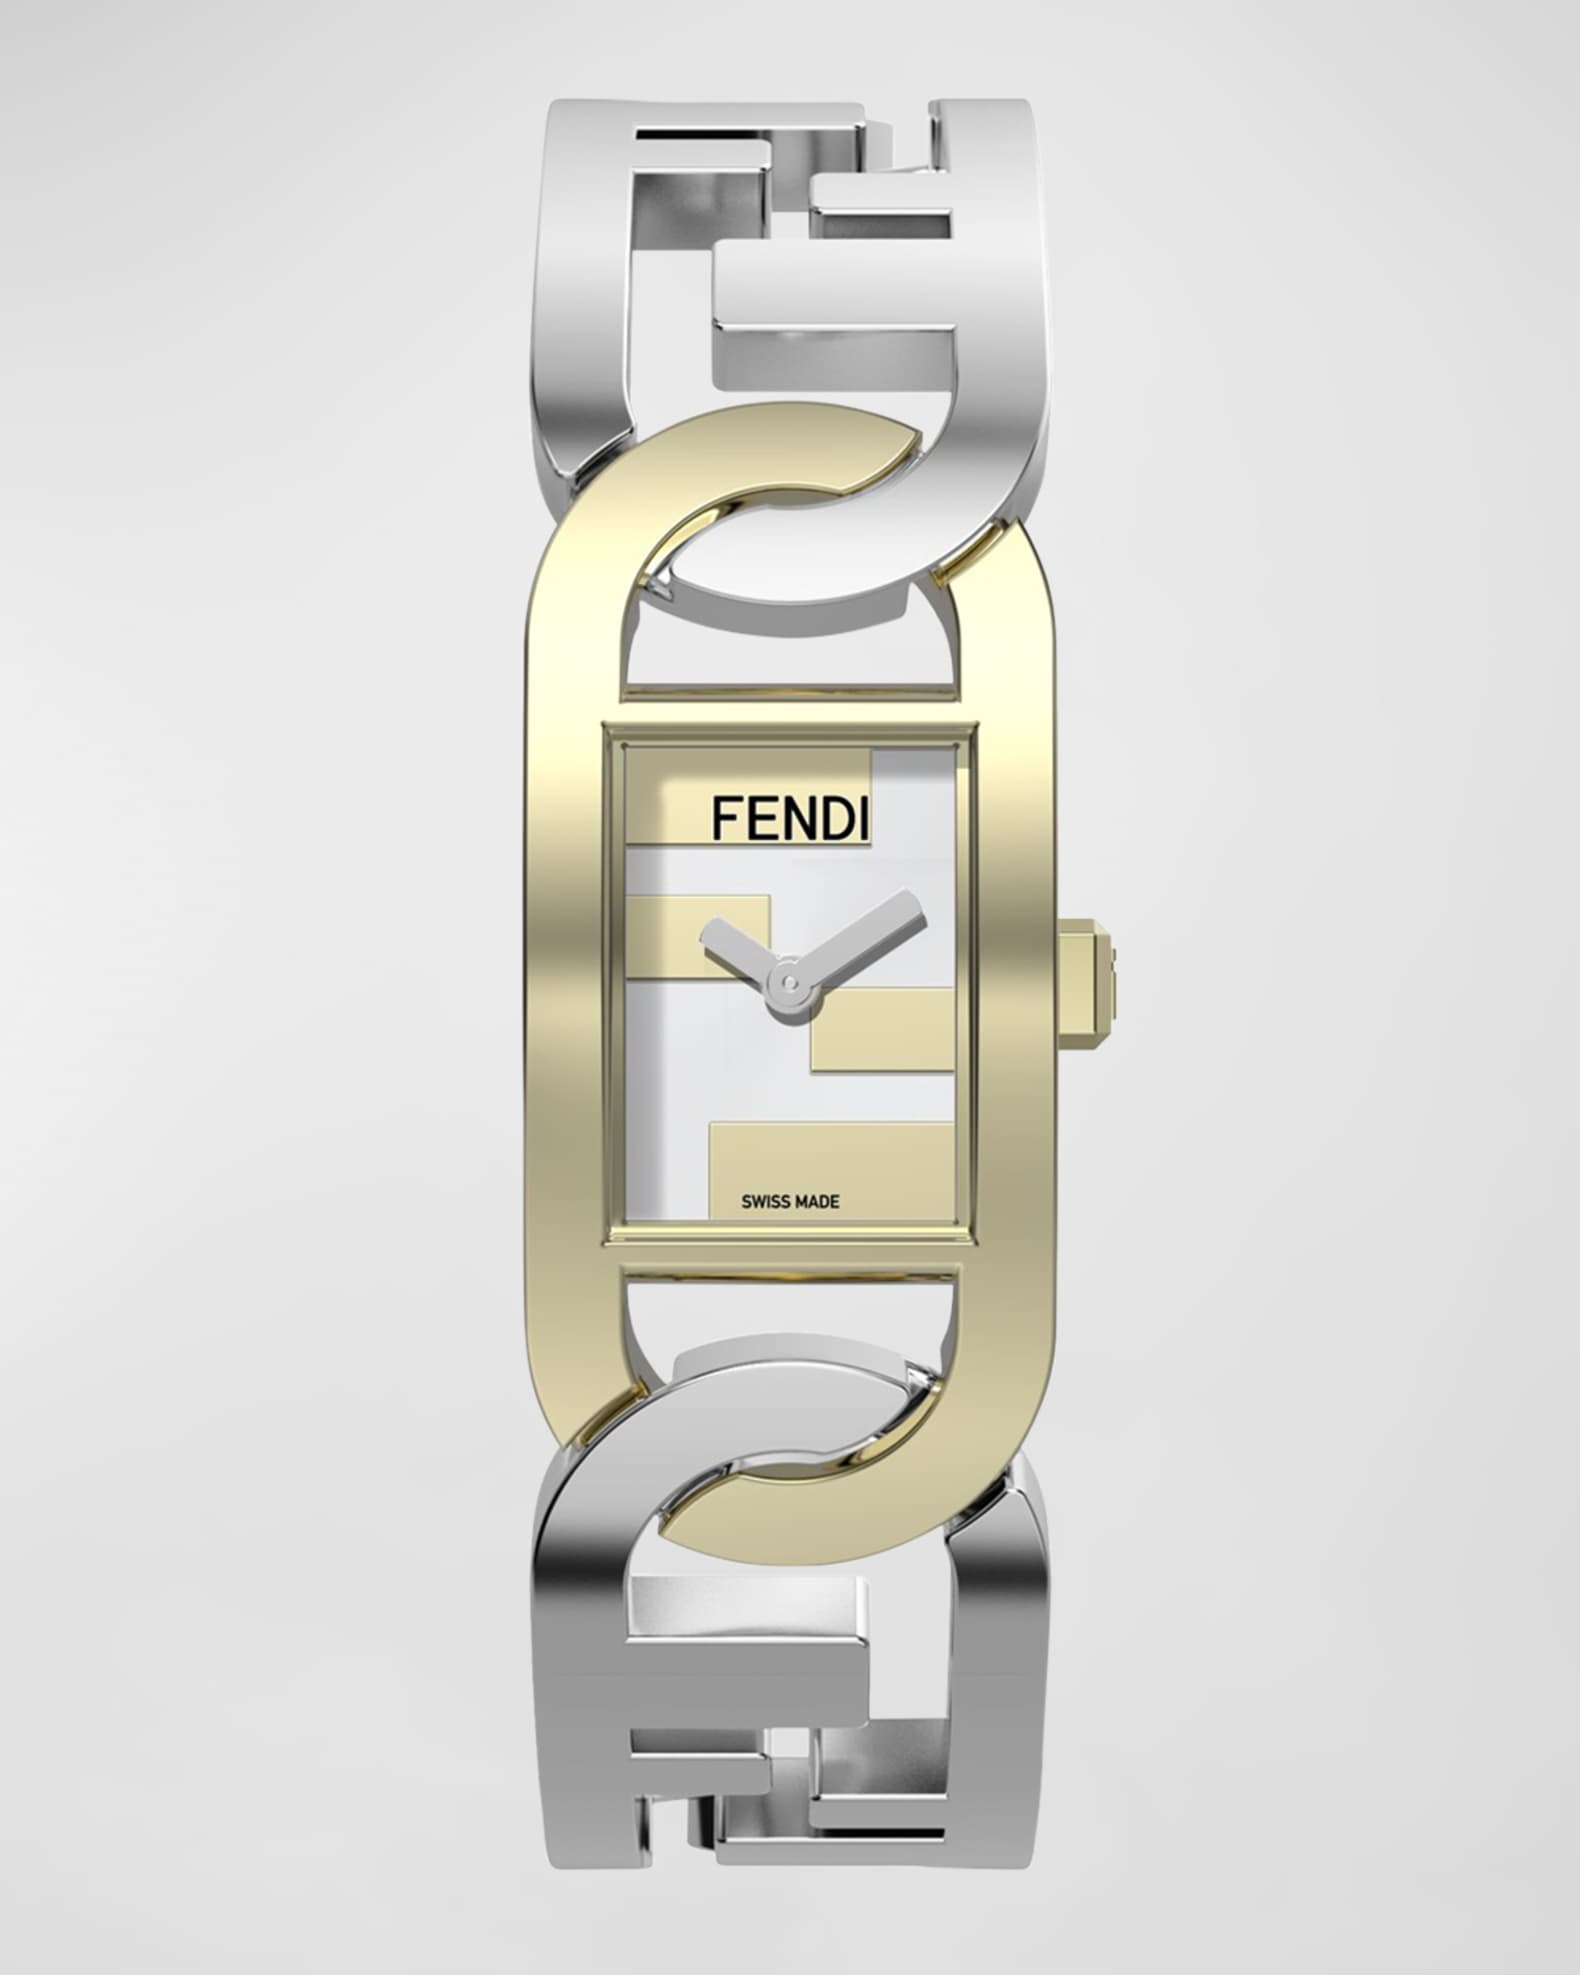 Fendi Releases the New O'Lock Watch Line